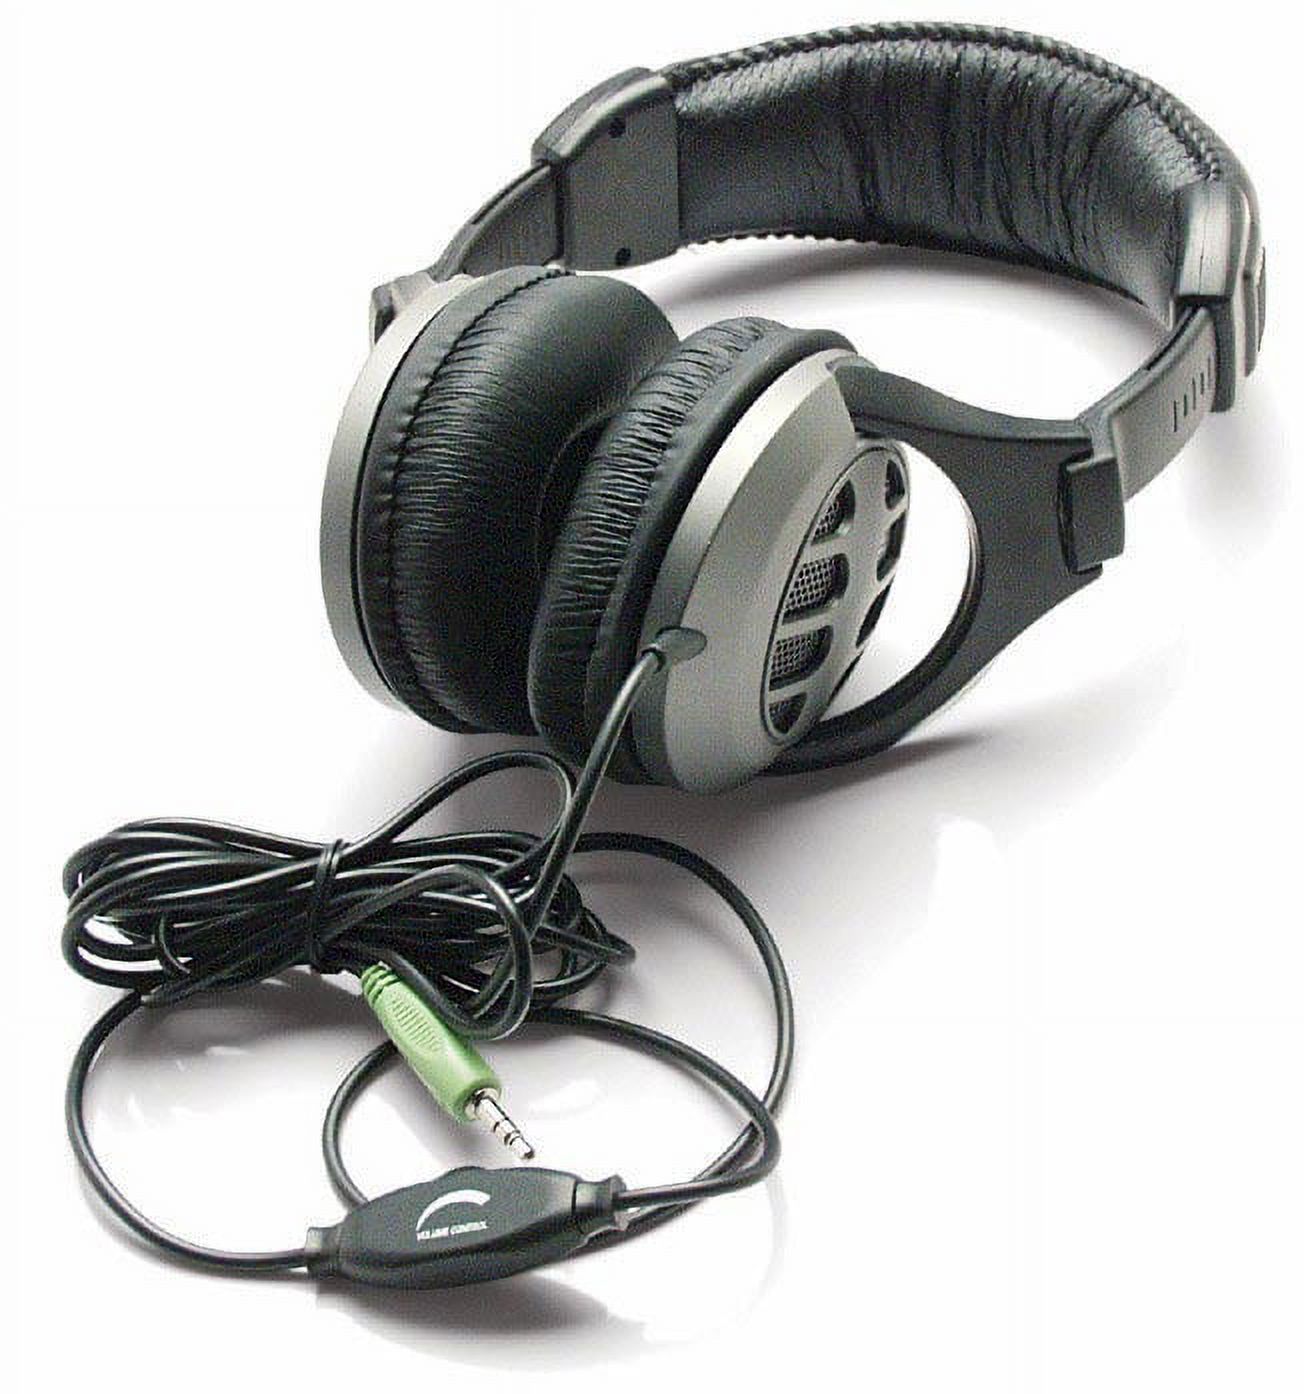 INLAND PRODUCTS INC. - HEADPHONE W/VOLUME CONTROL - image 1 of 5